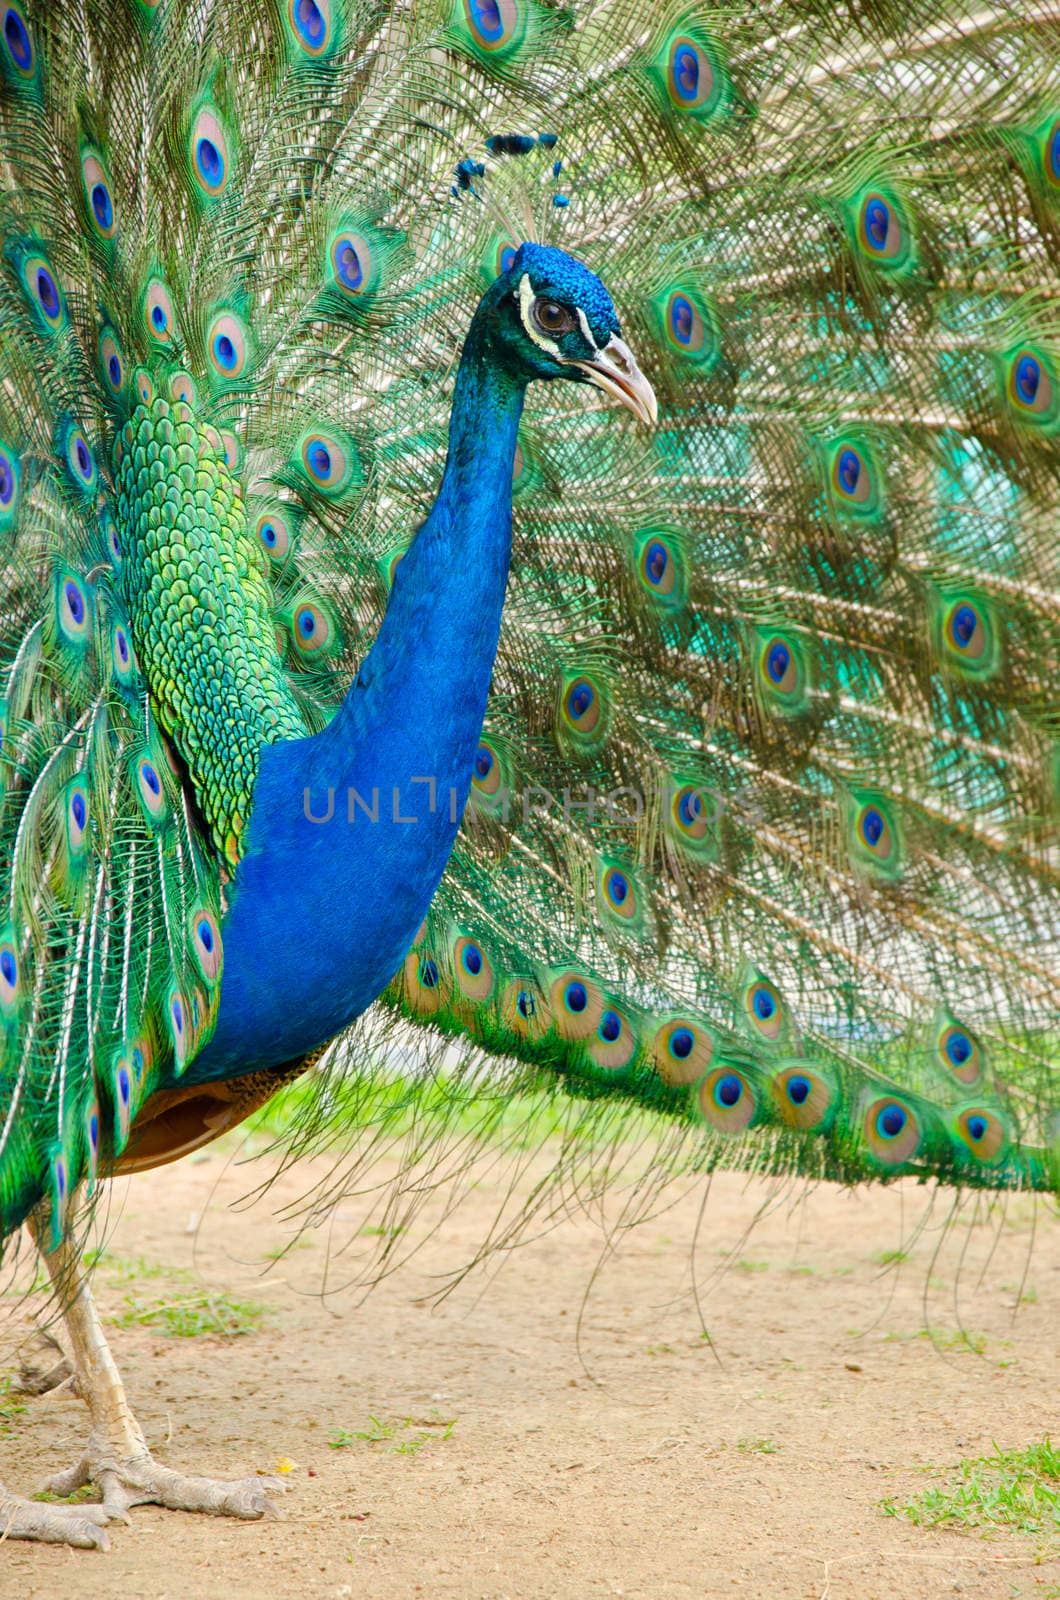 Peacock with Feathers Out by Gamjai